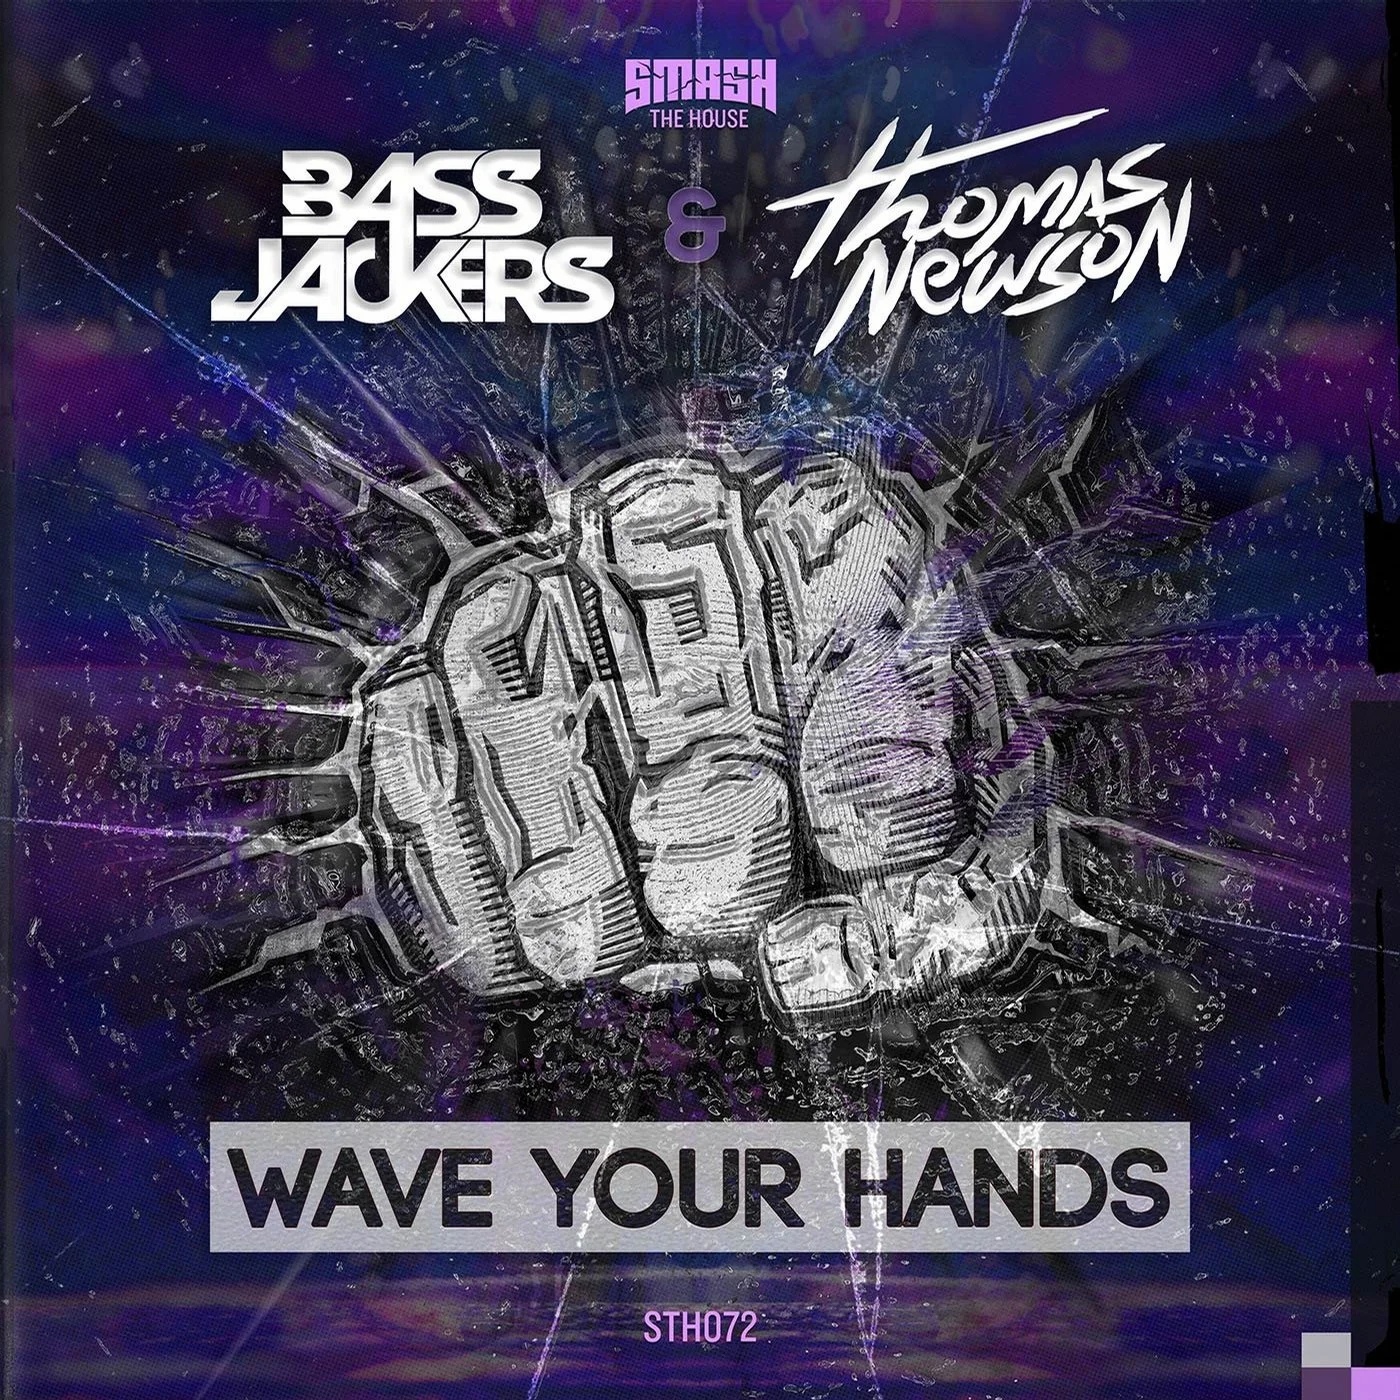 Bassjackers & Thomas Newson Wave Your Hands cover artwork